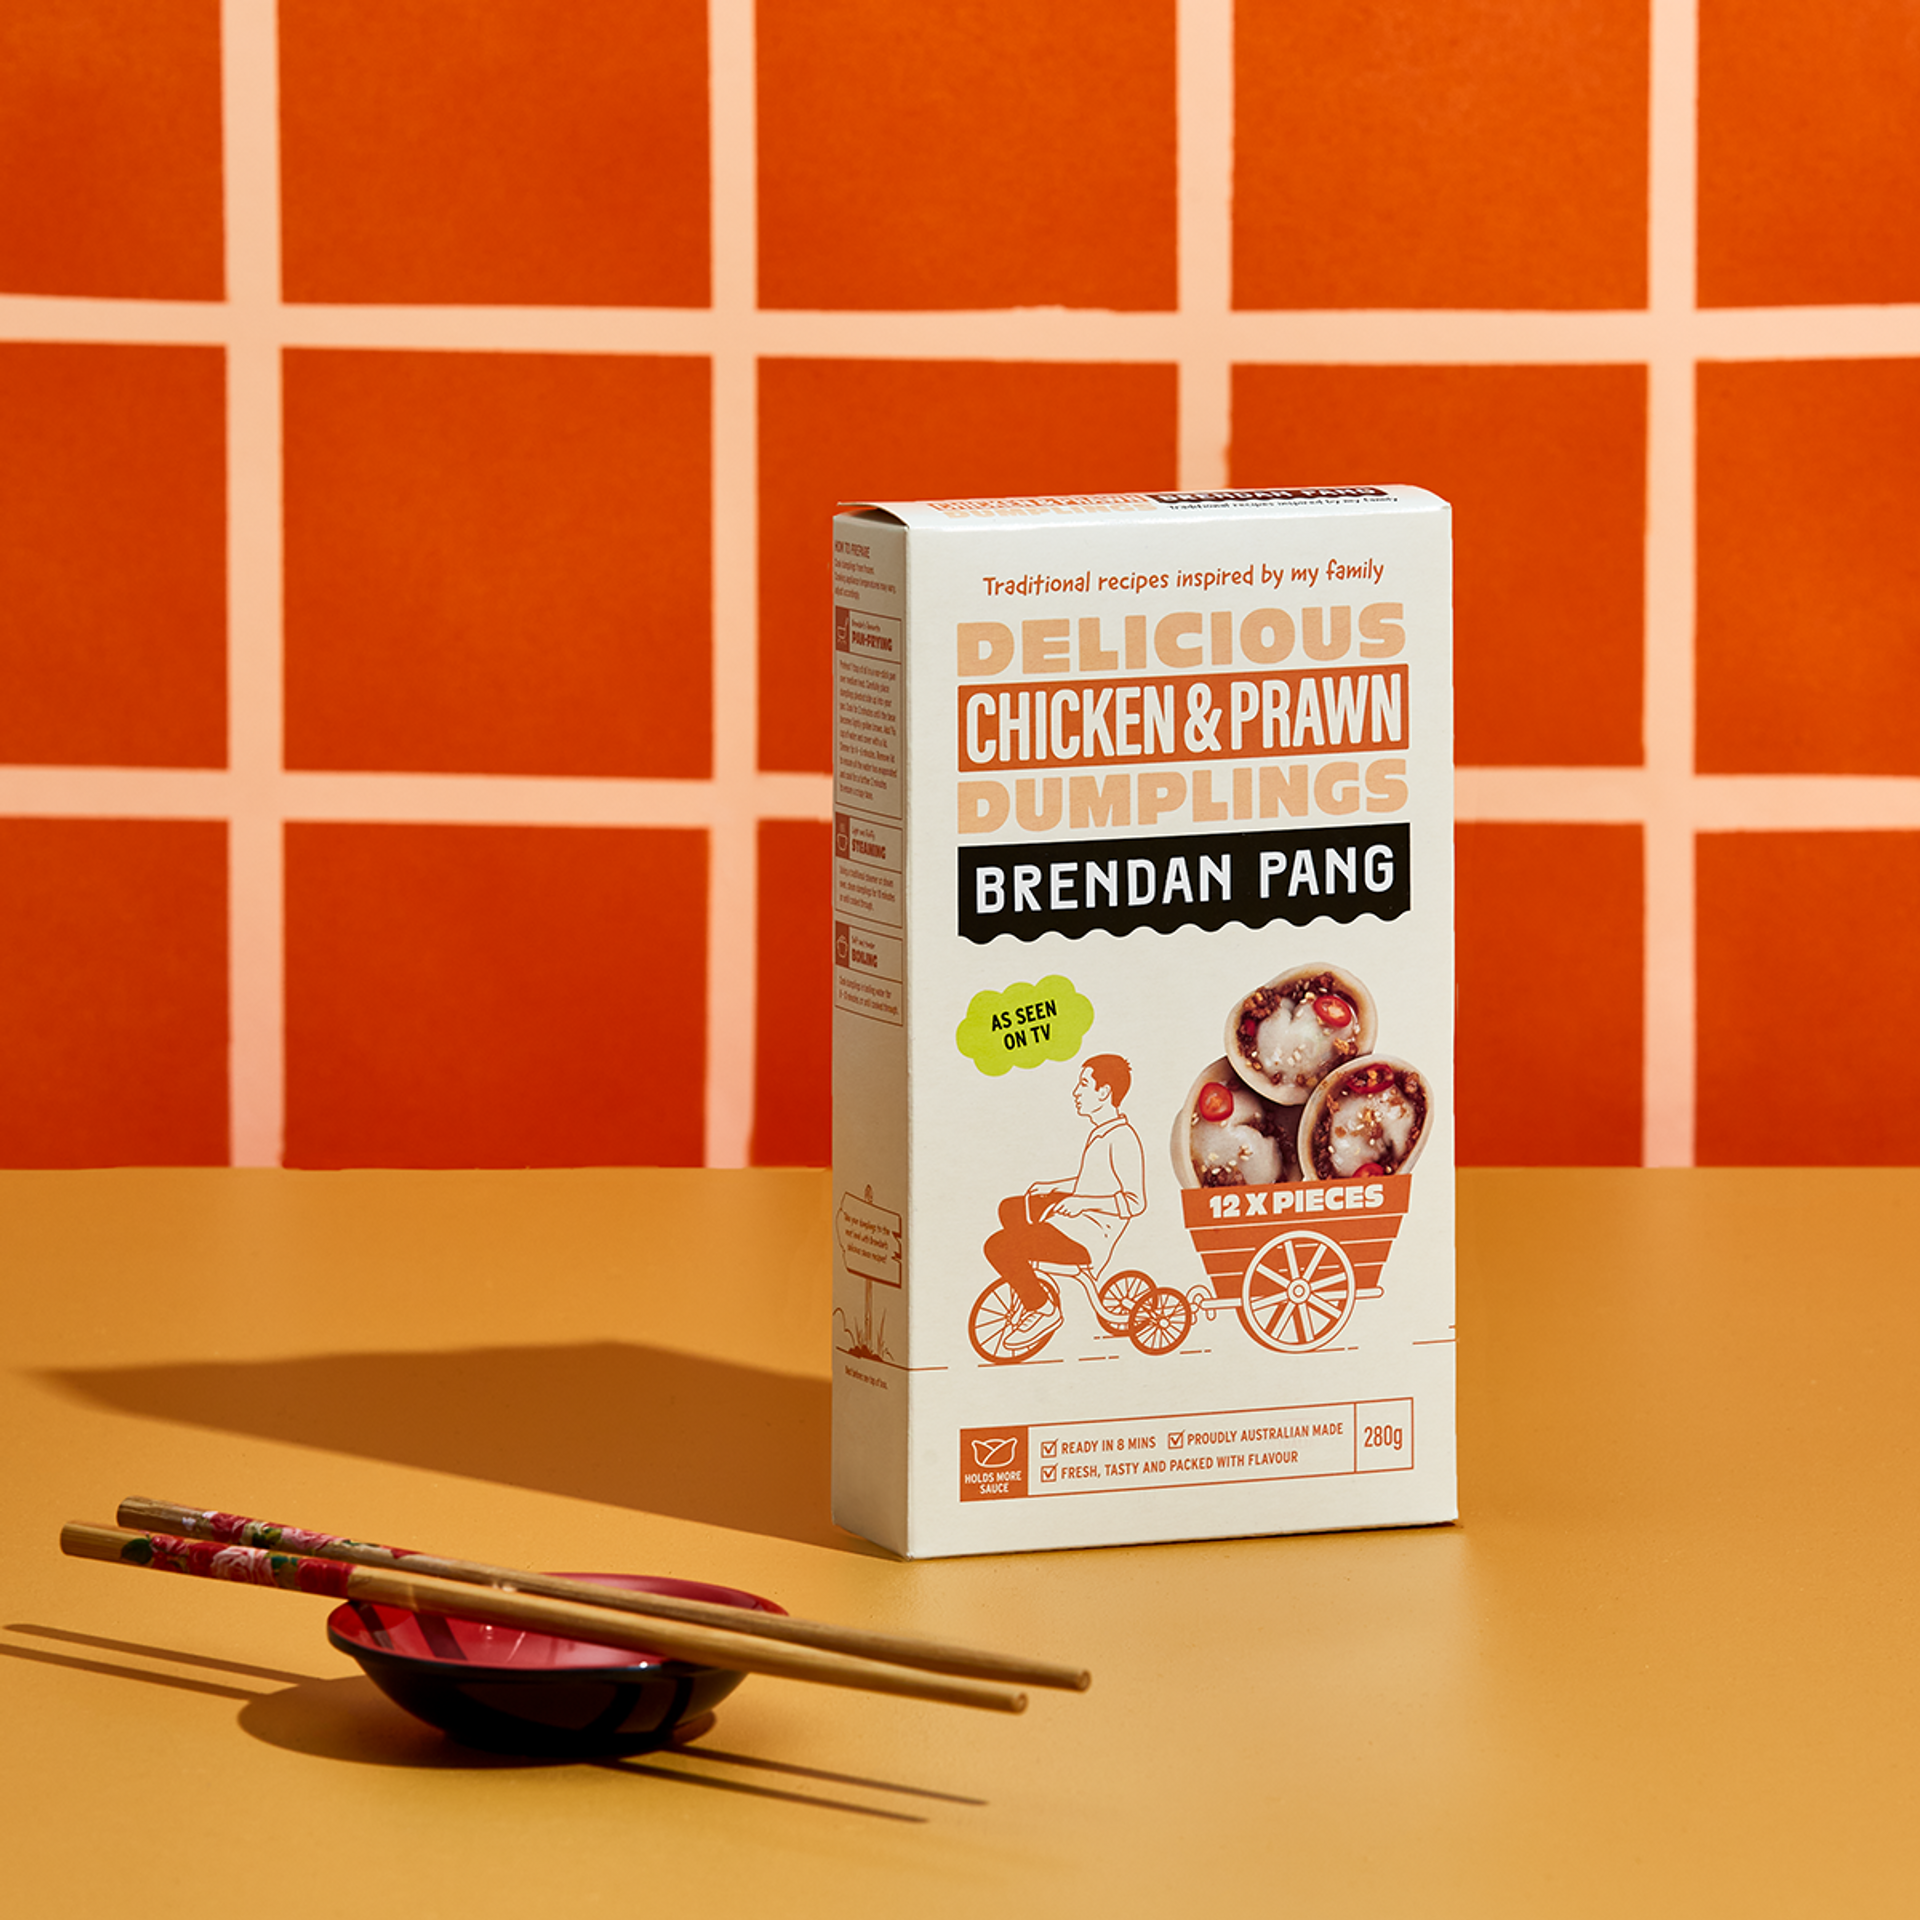 Dumpling packaging design in a bright, orange tiled kitchen featuring brand identity for Brendan Pang designed by creative agency Our Revolution